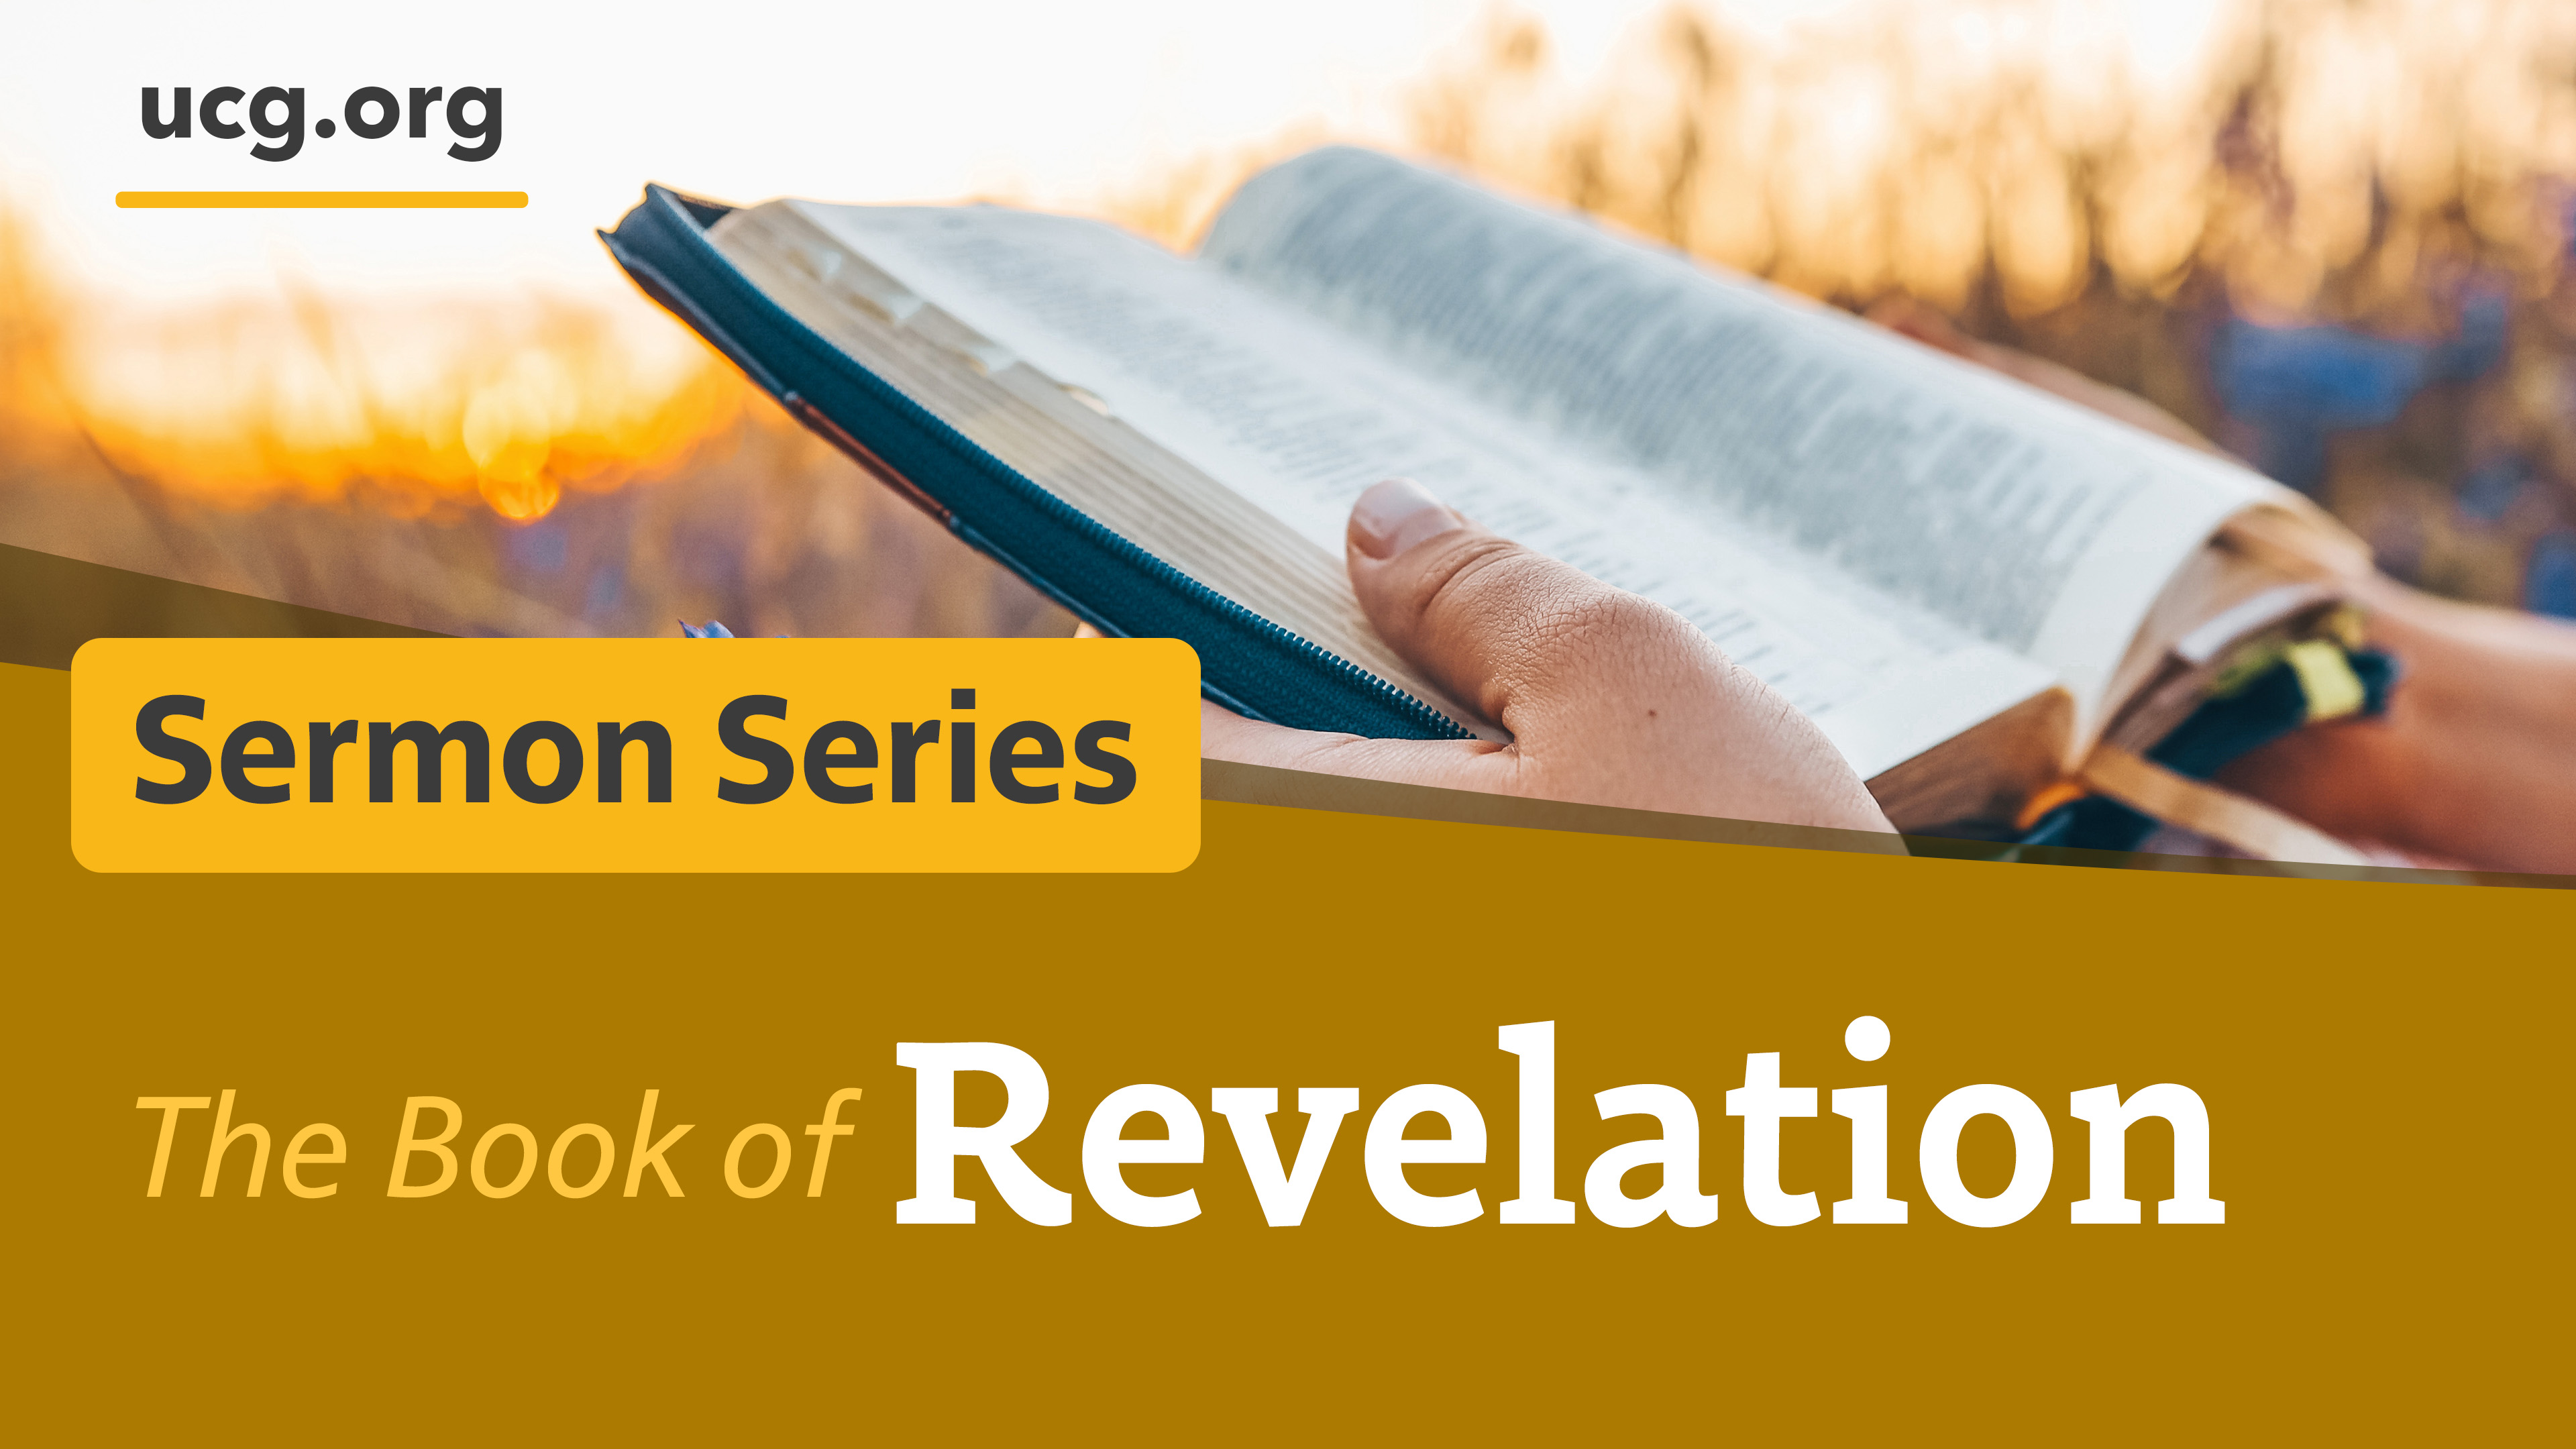 The Book of Revelation series